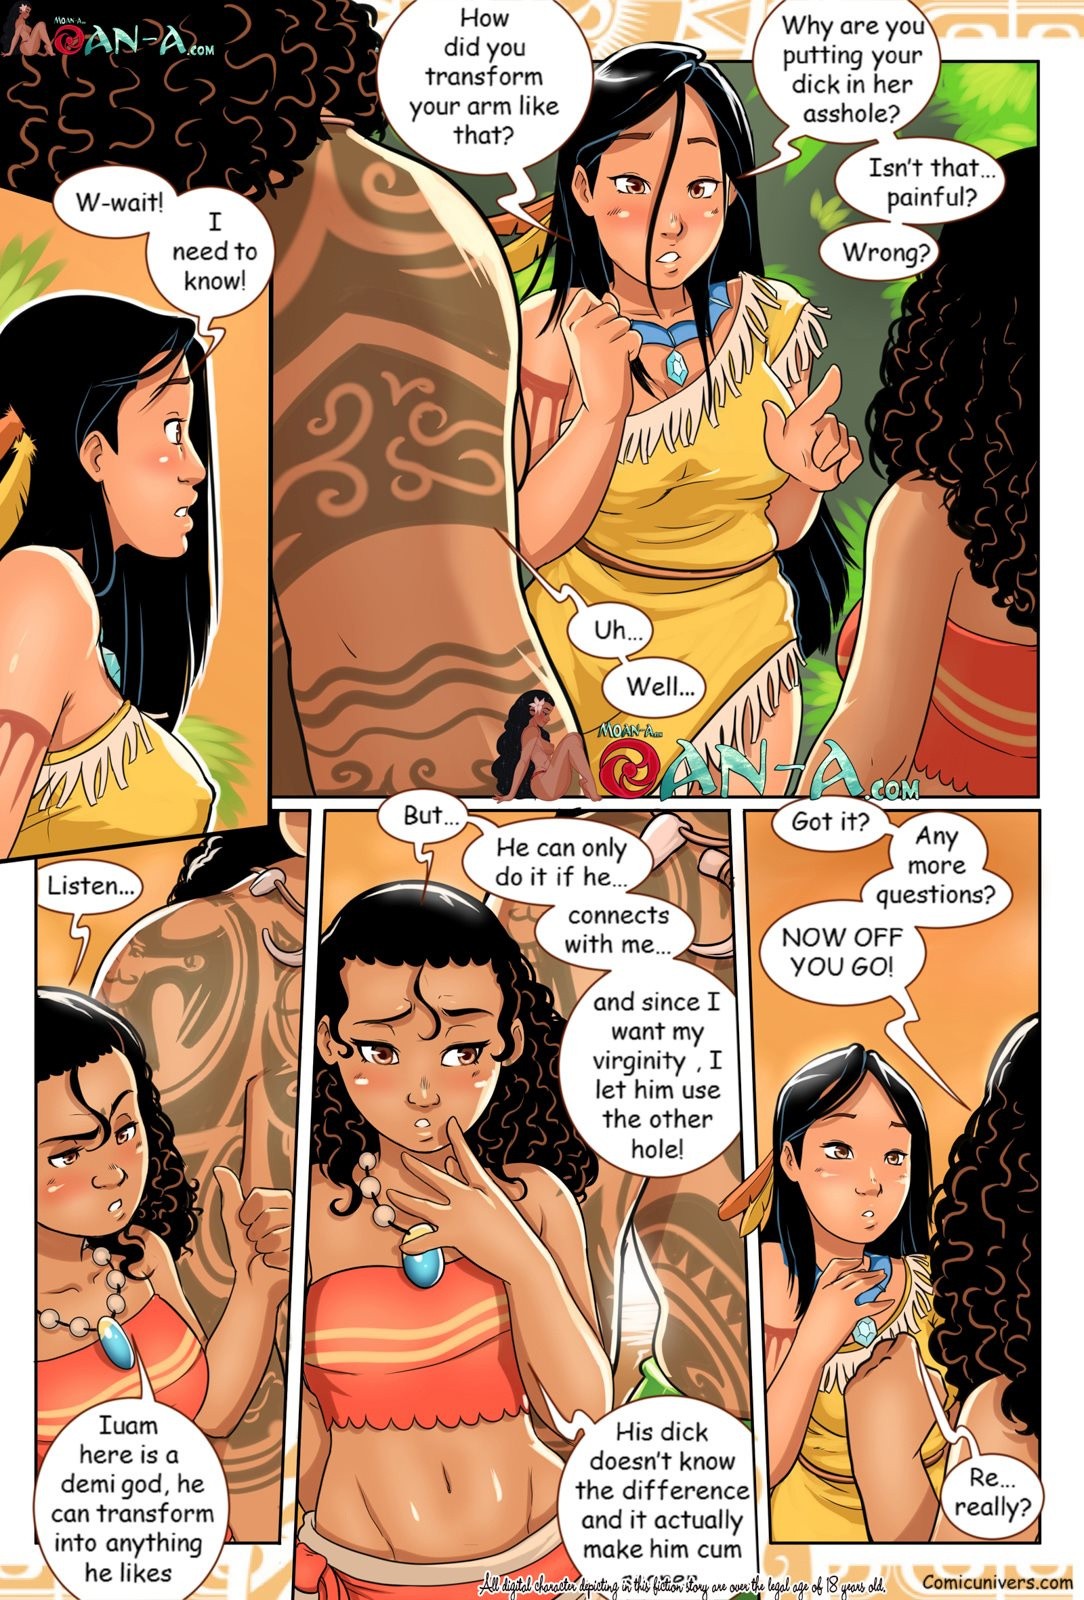 Moan-a Moana Lost - 2 porn comic picture 8